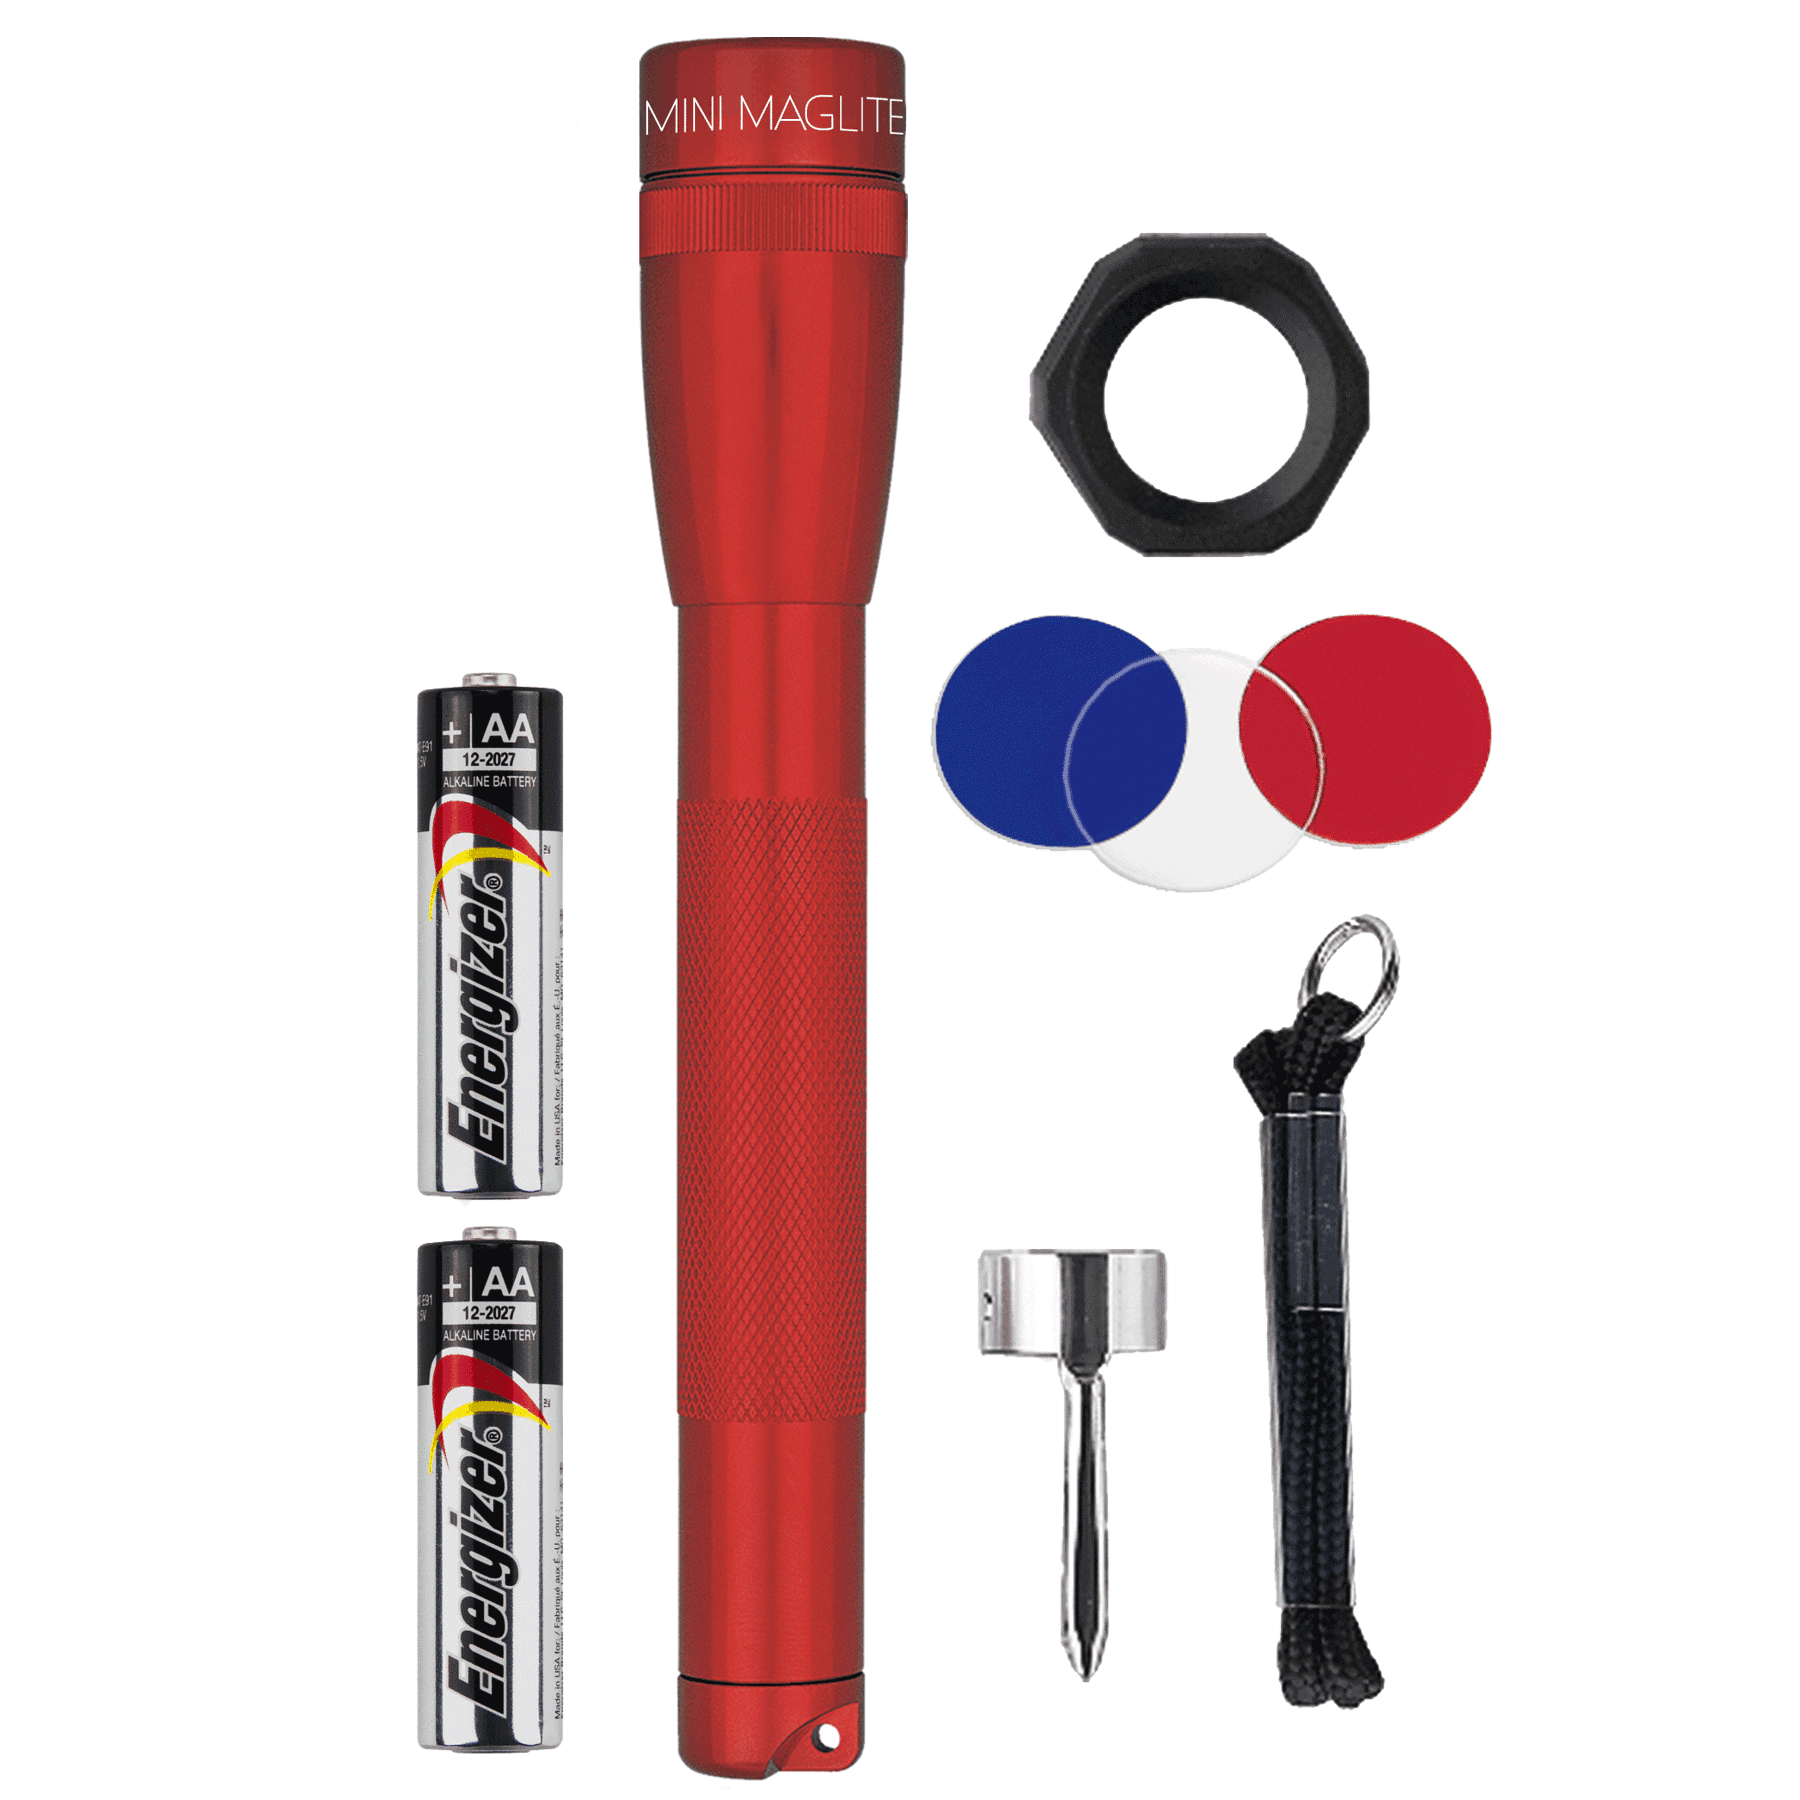 Mini Maglite 2 AAA LED Torch with pocket clip Brand New in Presentation Case 